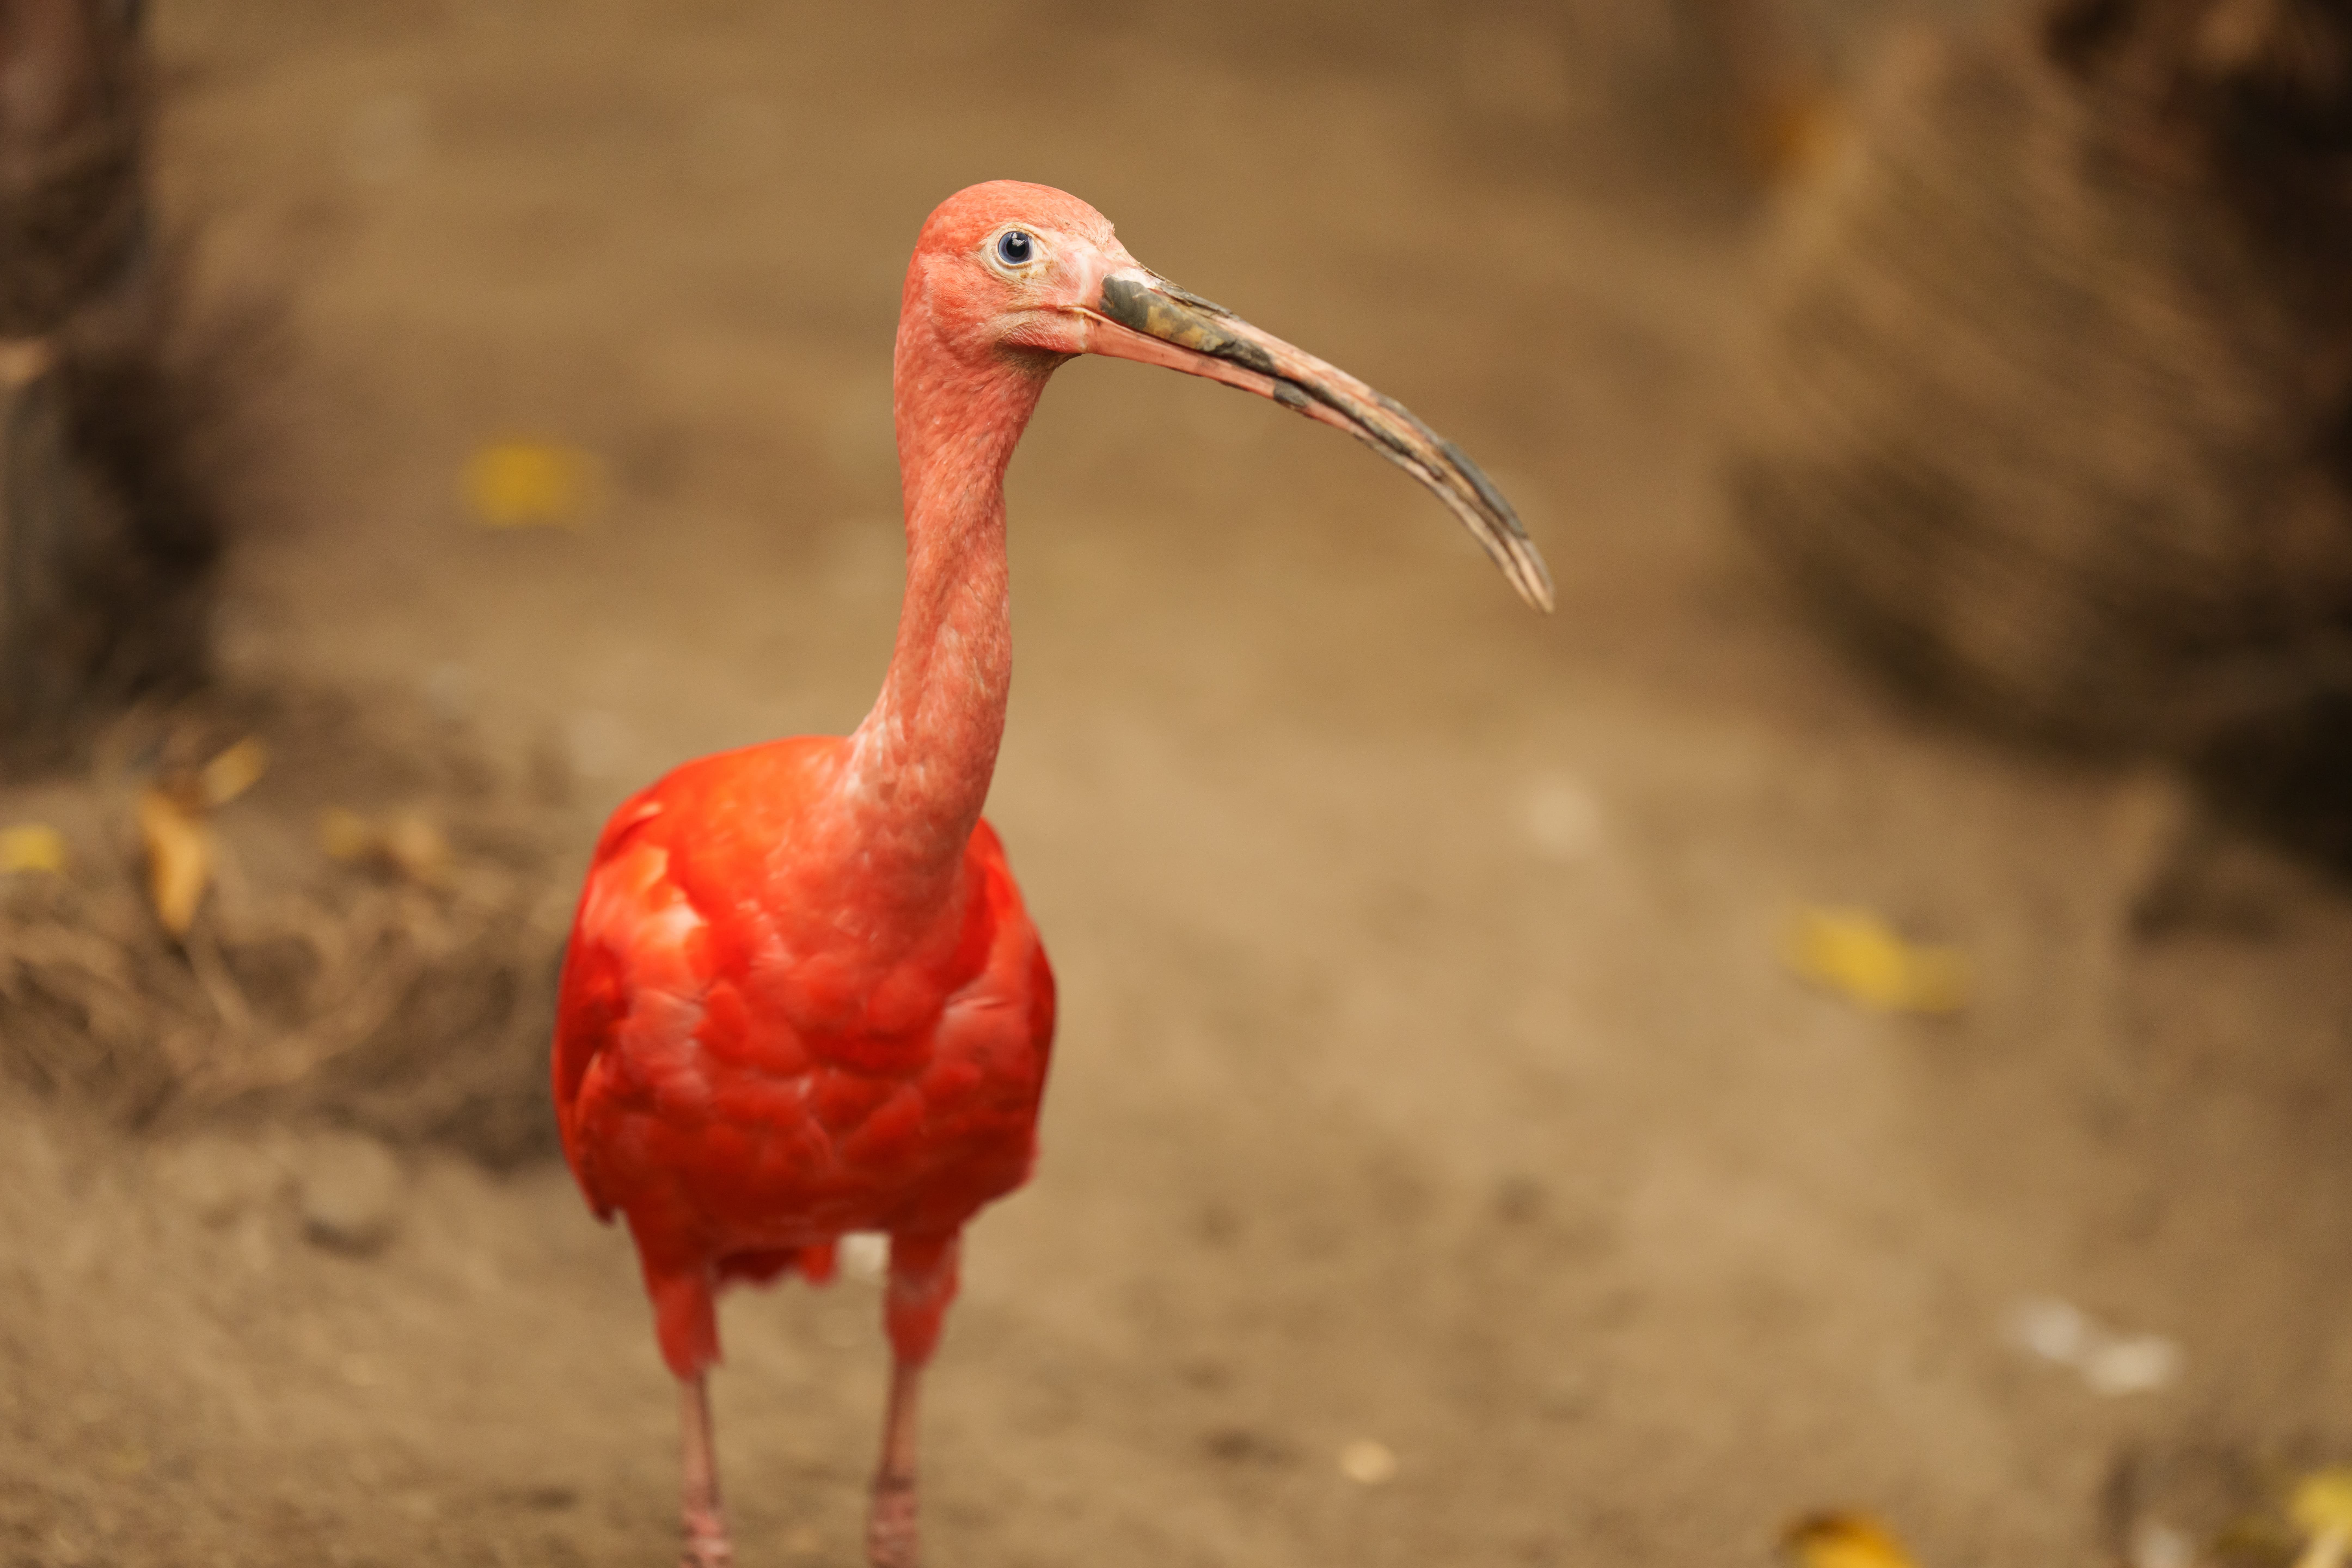 Scarlet Ibis at Leeds Tropical World, 1/200s, f/2.8, ISO1250, Sony 70-200mm at 191mm, with Sony A1, ACR